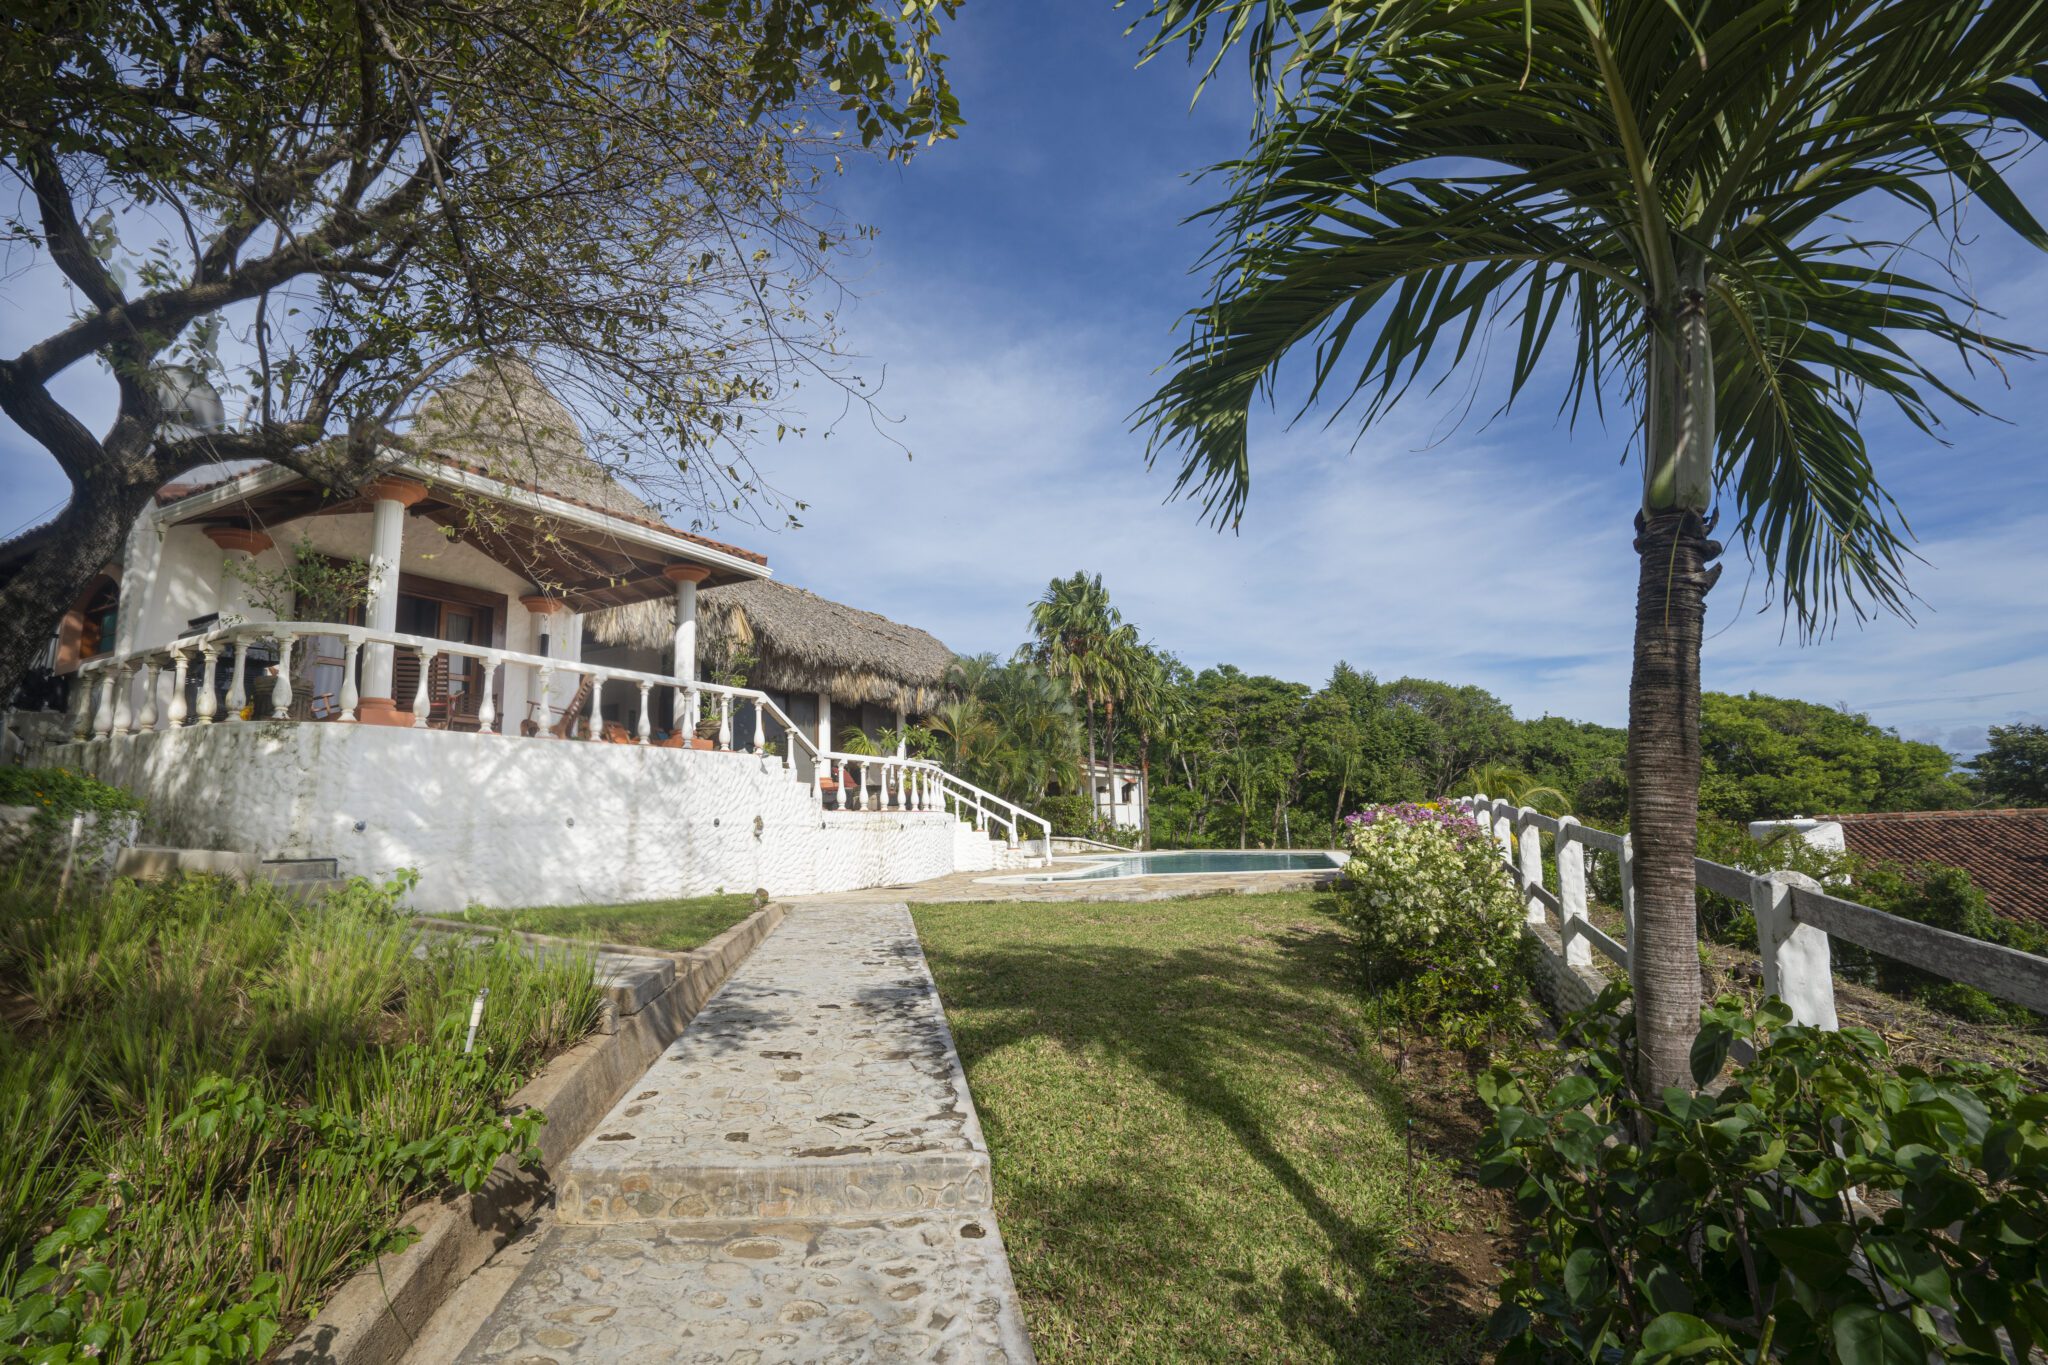 http://view%20of%20the%20house%20from%20a%20Rancho%20Santana%20Property%20for%20Sale%20in%20Nicaragua%20B13